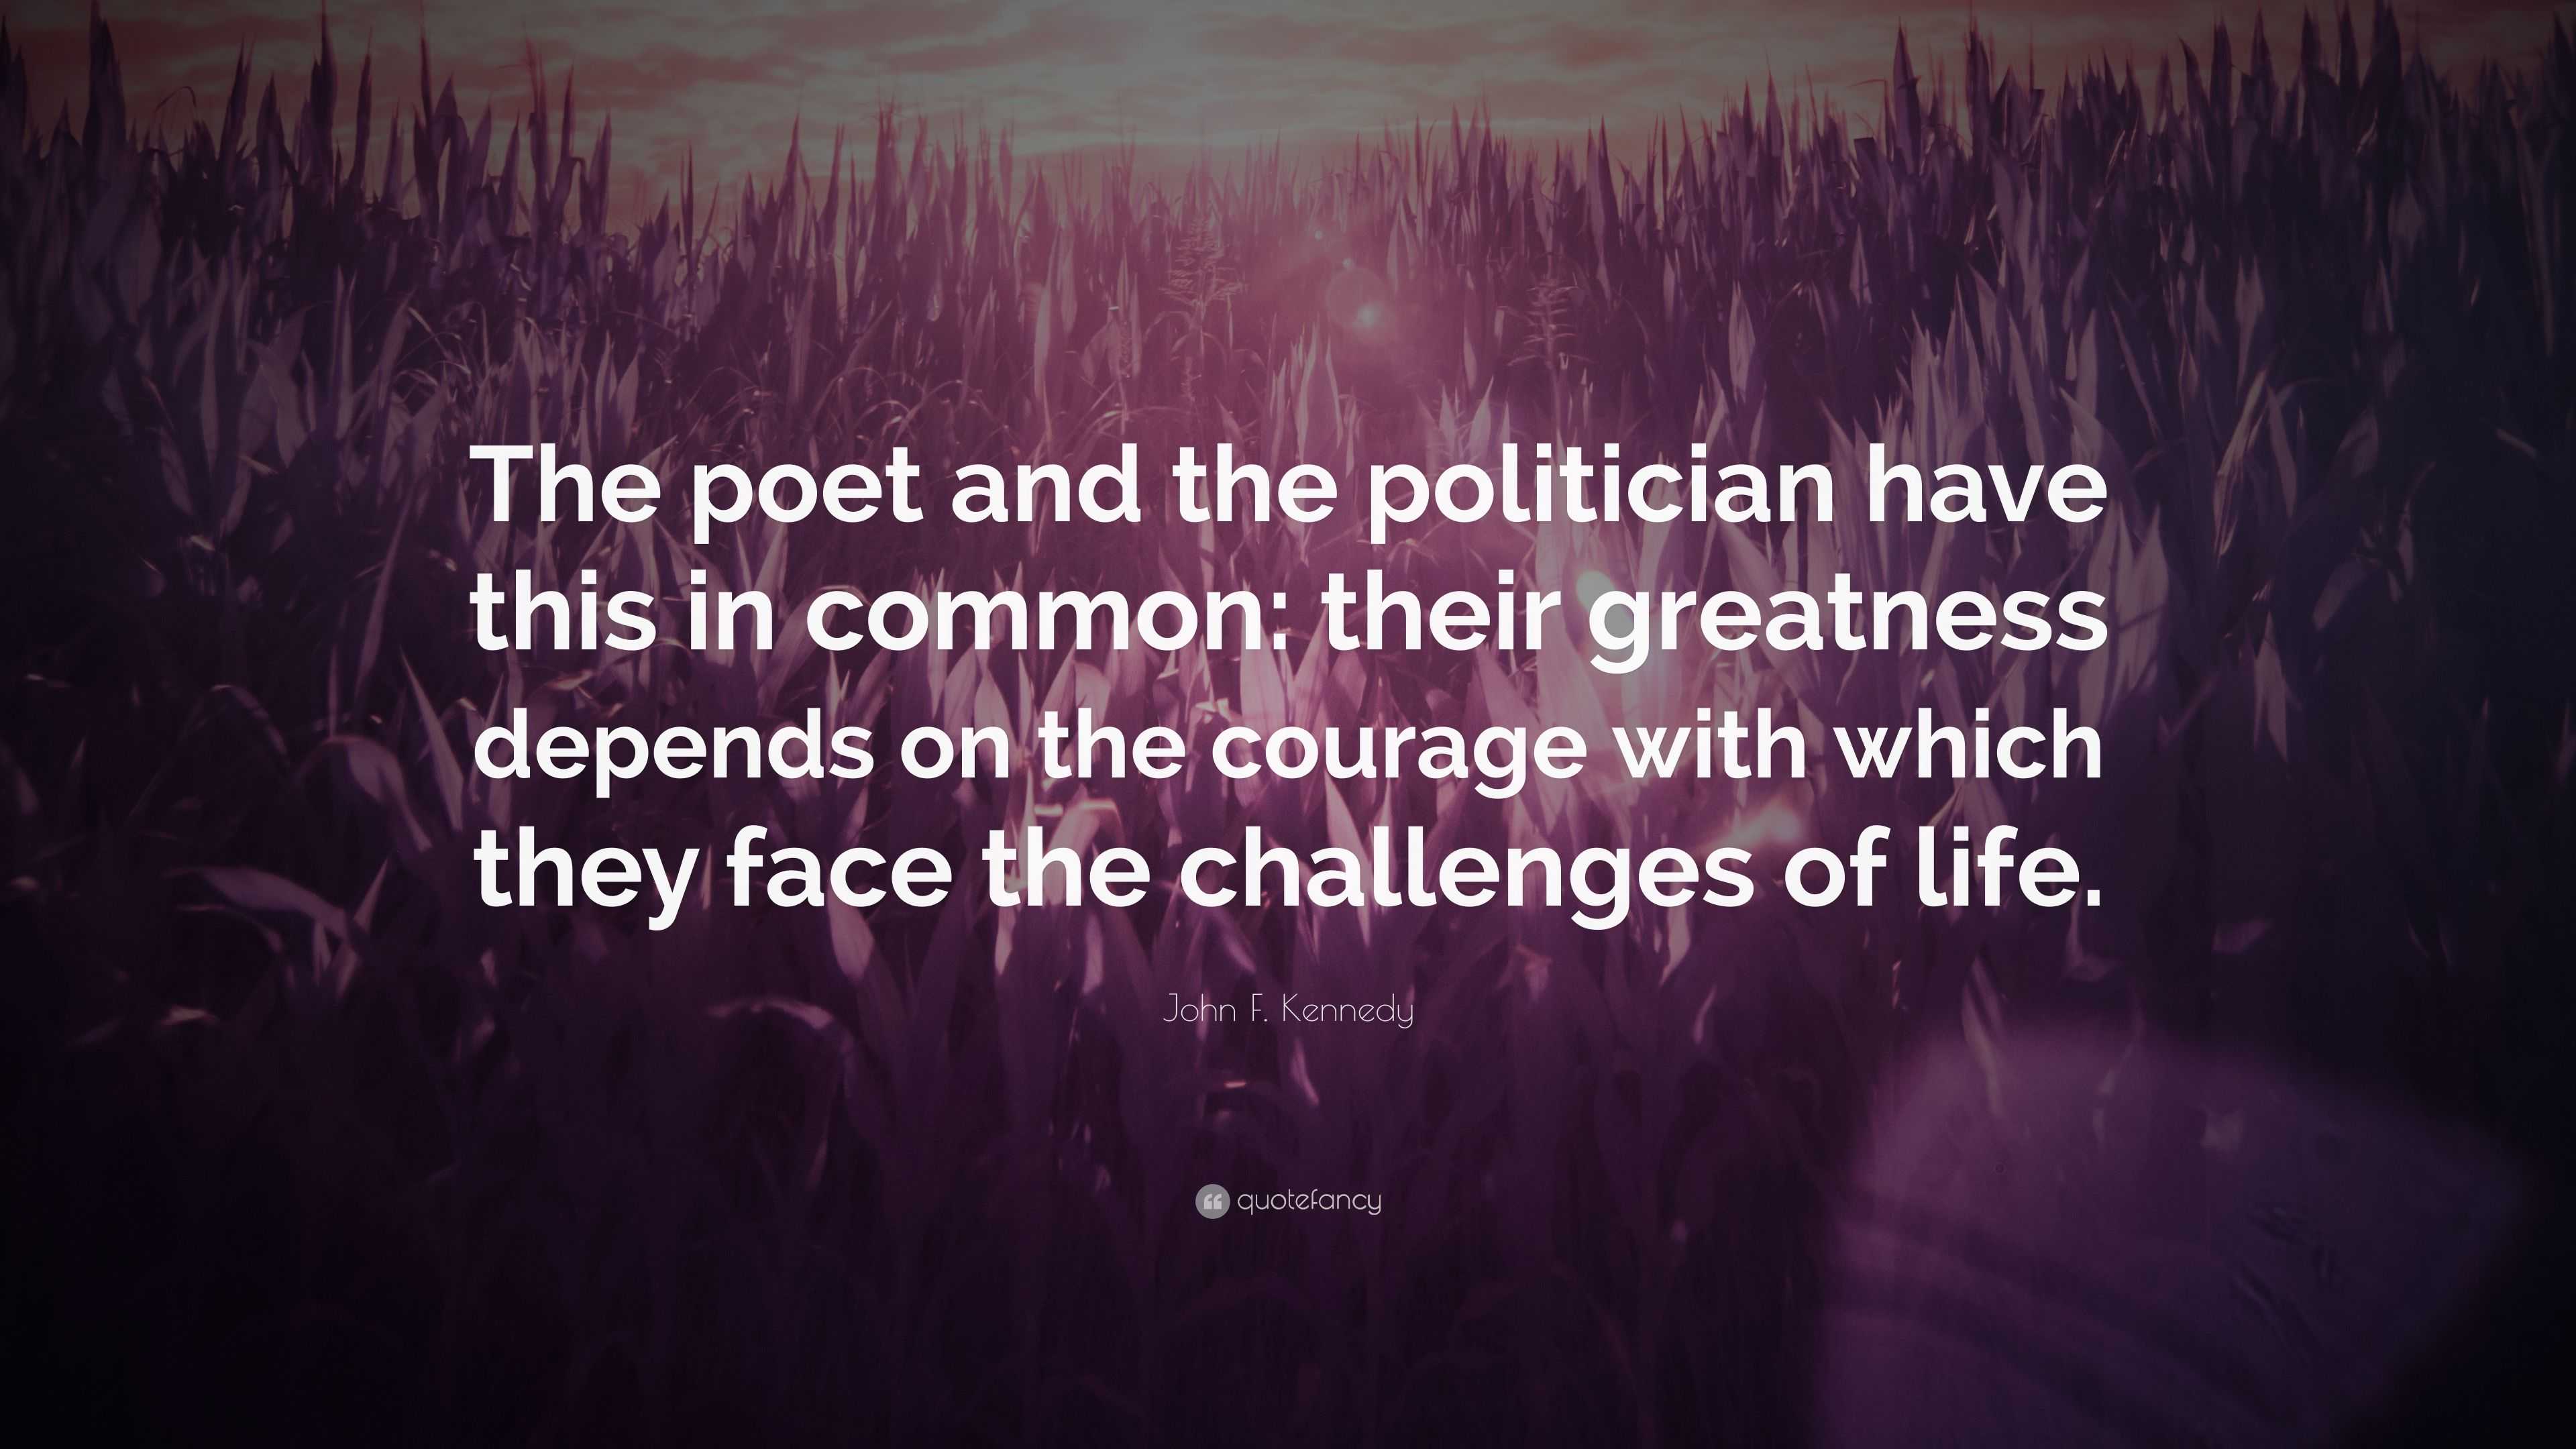 John F Kennedy Quote The Poet And The Politician Have This In Common Their Greatness Depends On The Courage With Which They Face The Challen 7 Wallpapers Quotefancy